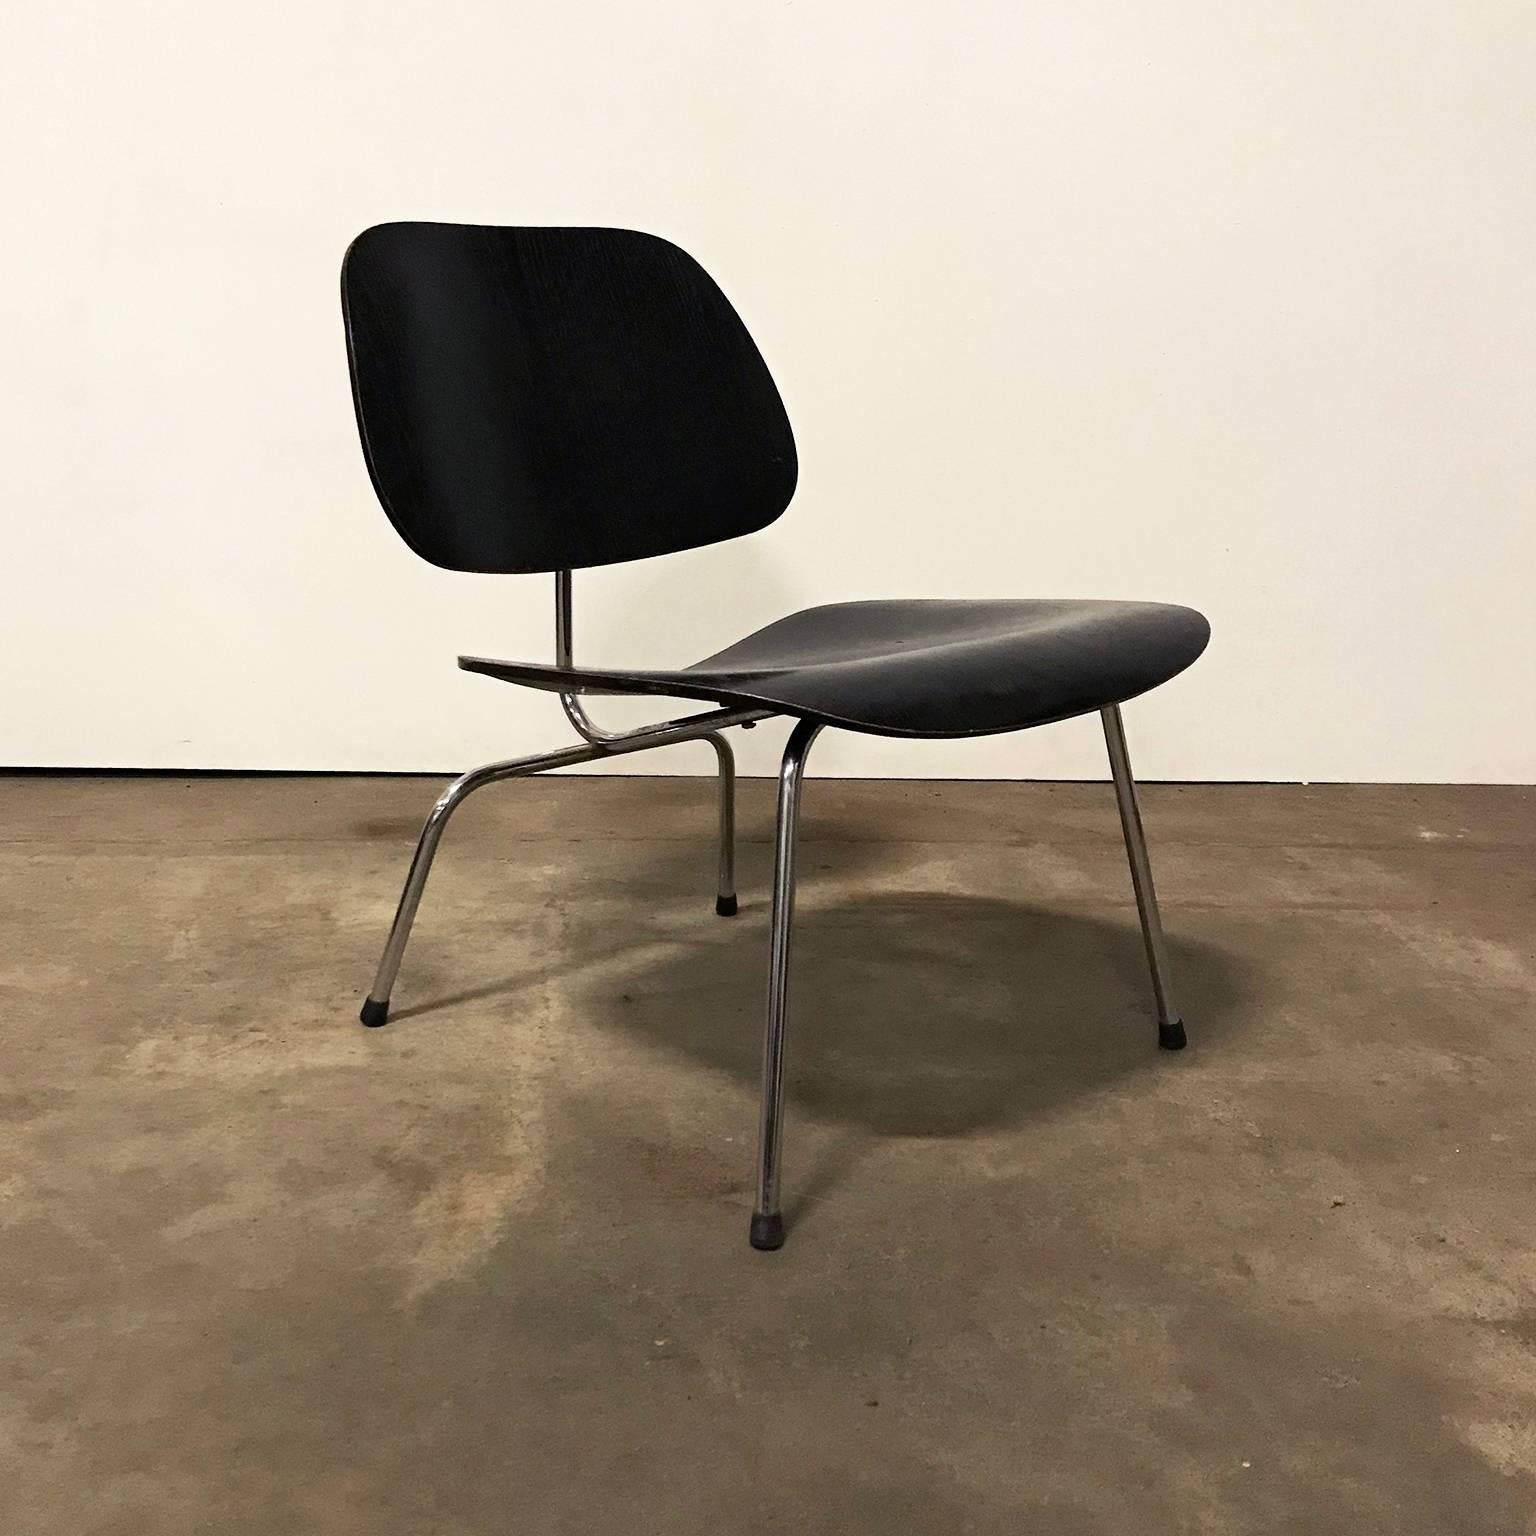 LCM with black wooden seat by Charles Eames, produced by Herman Miller. Very elegant design. The base is in good condition with just some spots. The backrest has some tiny damage and on the edge some loss of paint/lacquer (see picture #8). The seat